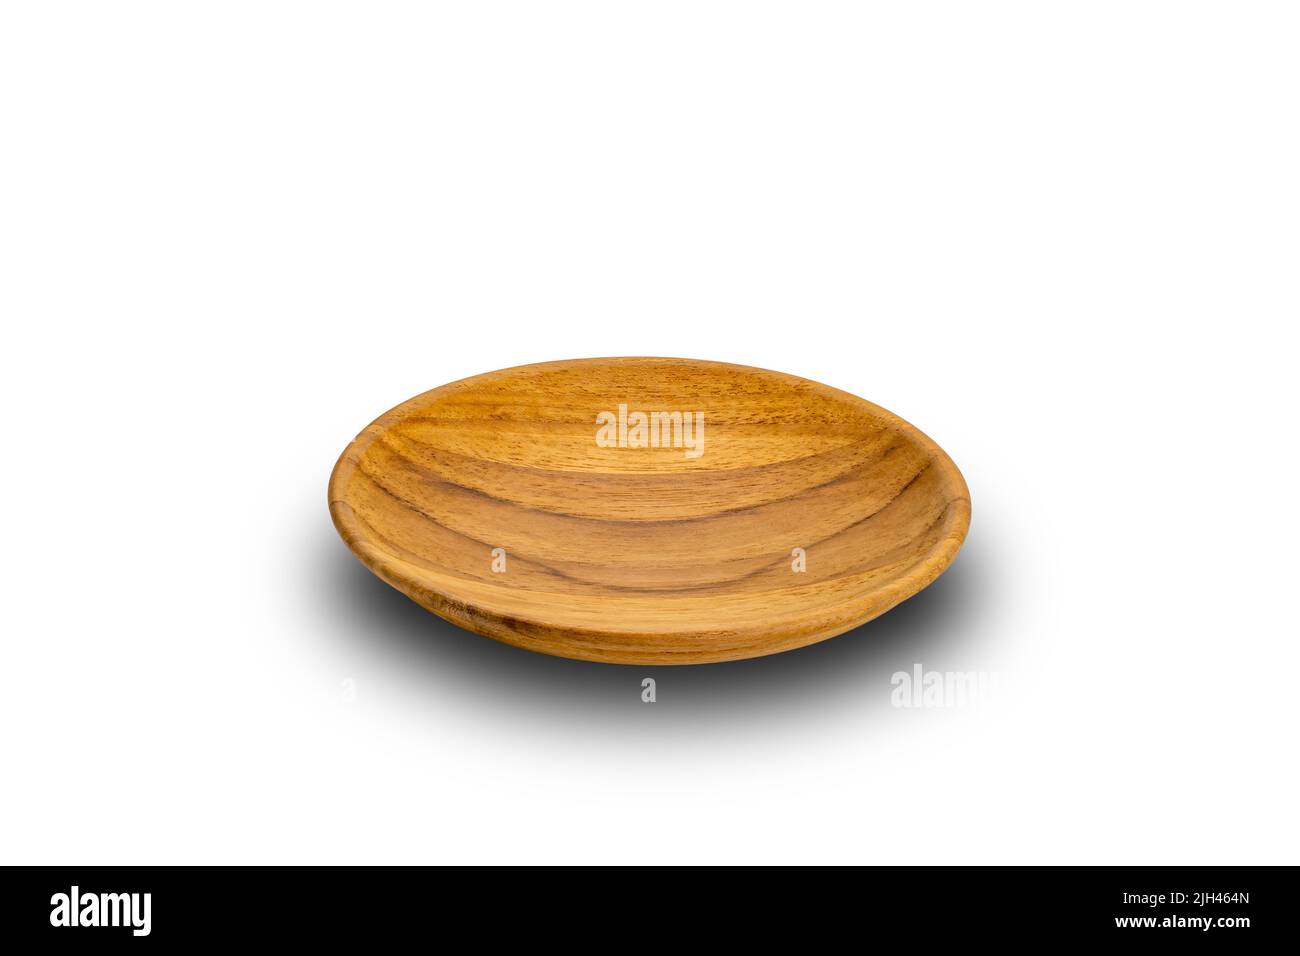 High angle view of small wooden plate on white background with clipping path. Stock Photo